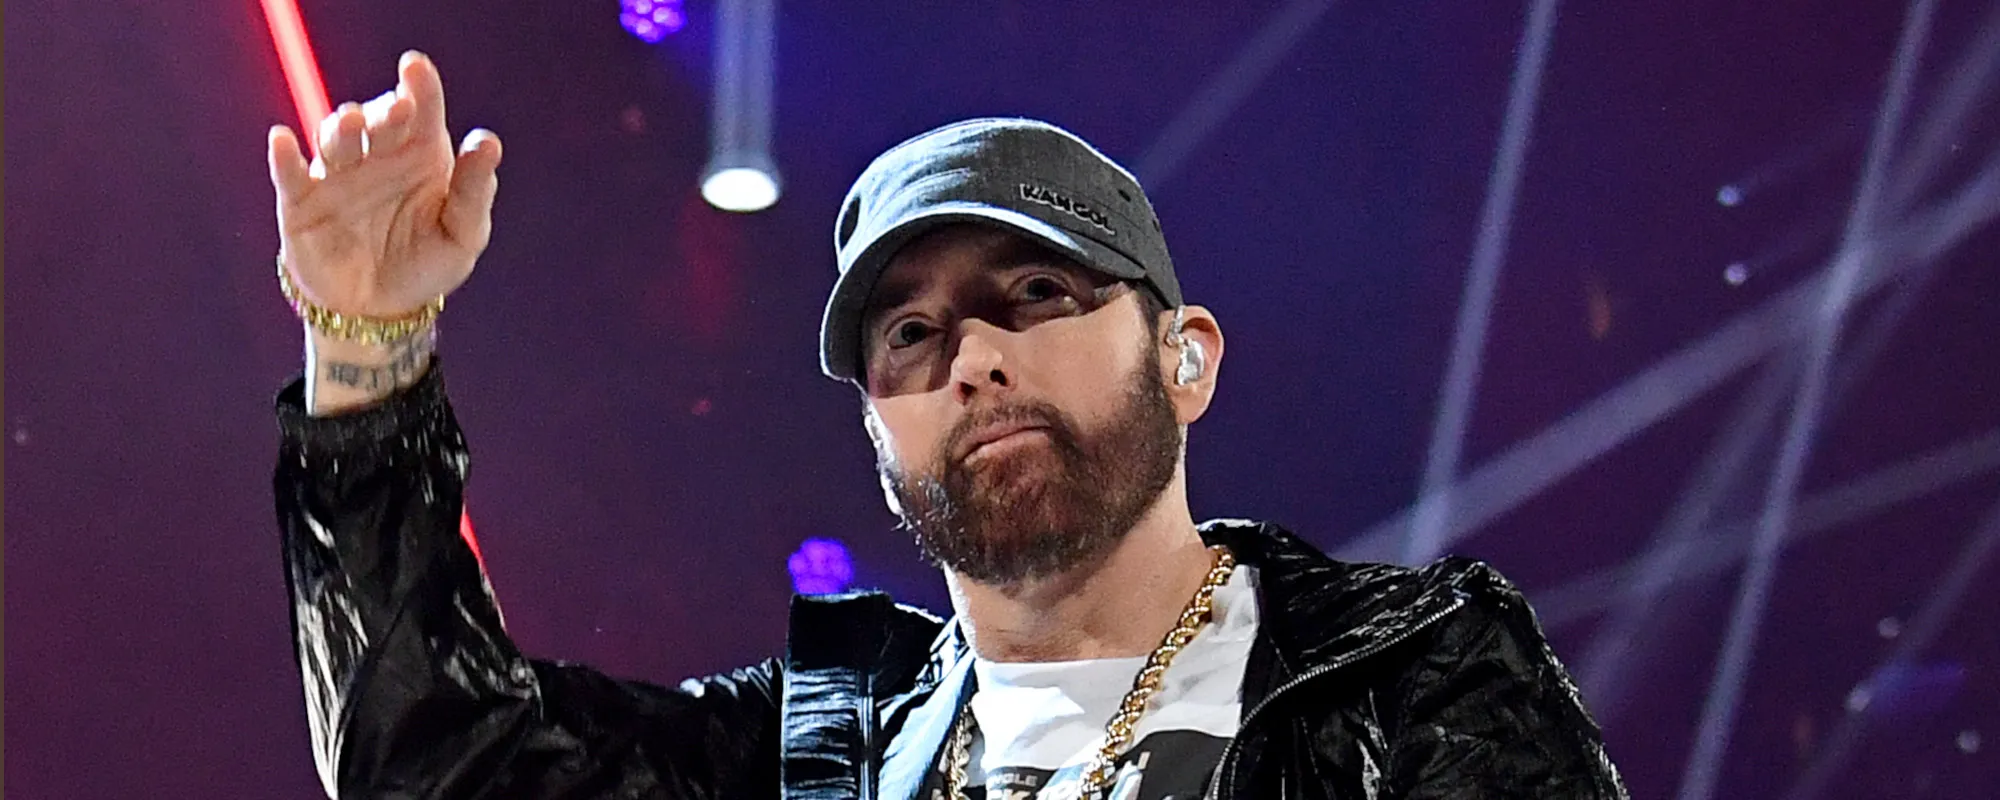 We Asked AI to Write Eminem’s “My Name Is” for William Shakespeare – See the Results